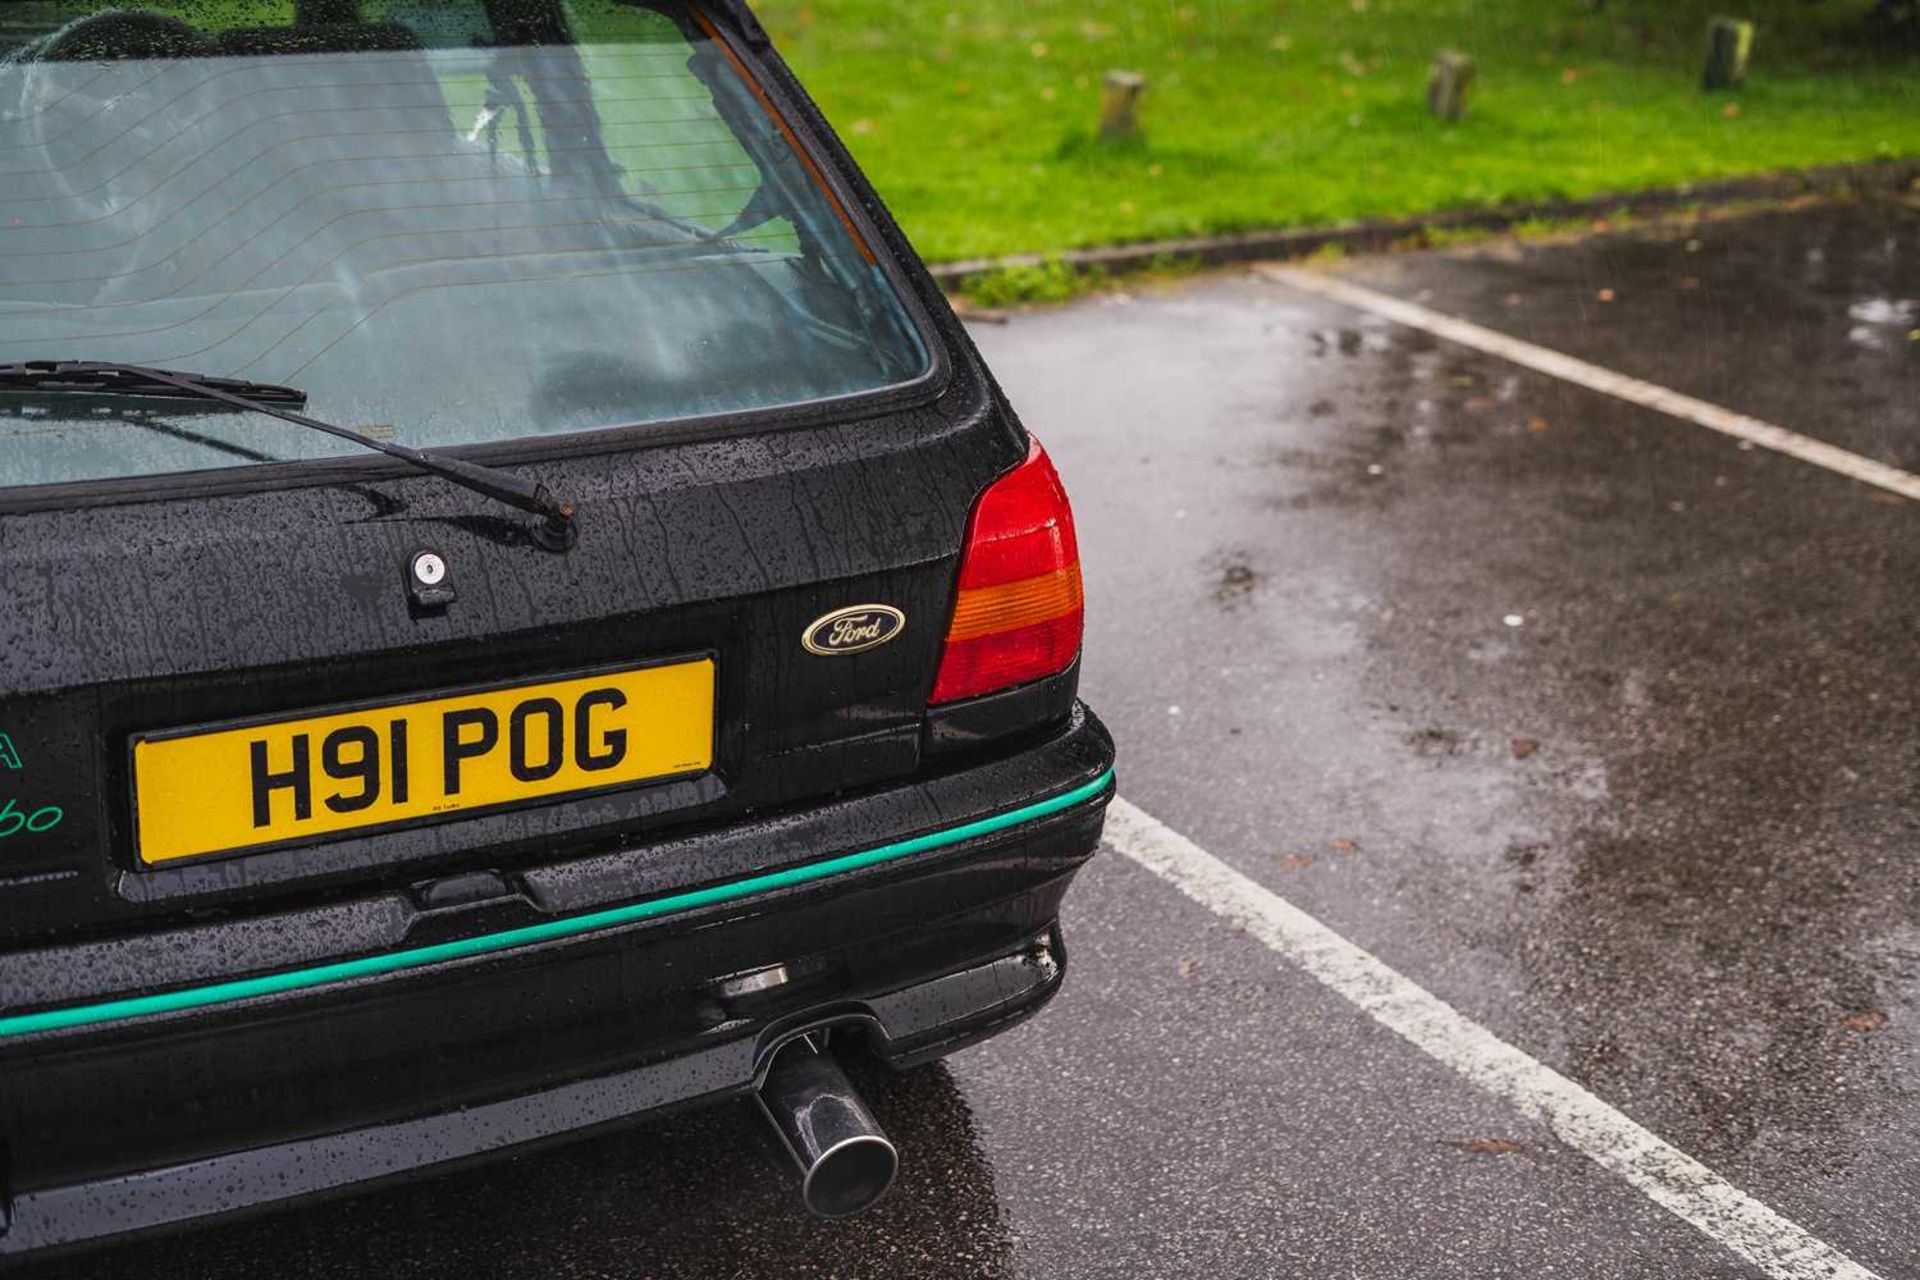 1991 Ford Fiesta RS Turbo Largely-original, save for the fitment of Mondeo-type alloy wheels  - Image 18 of 45